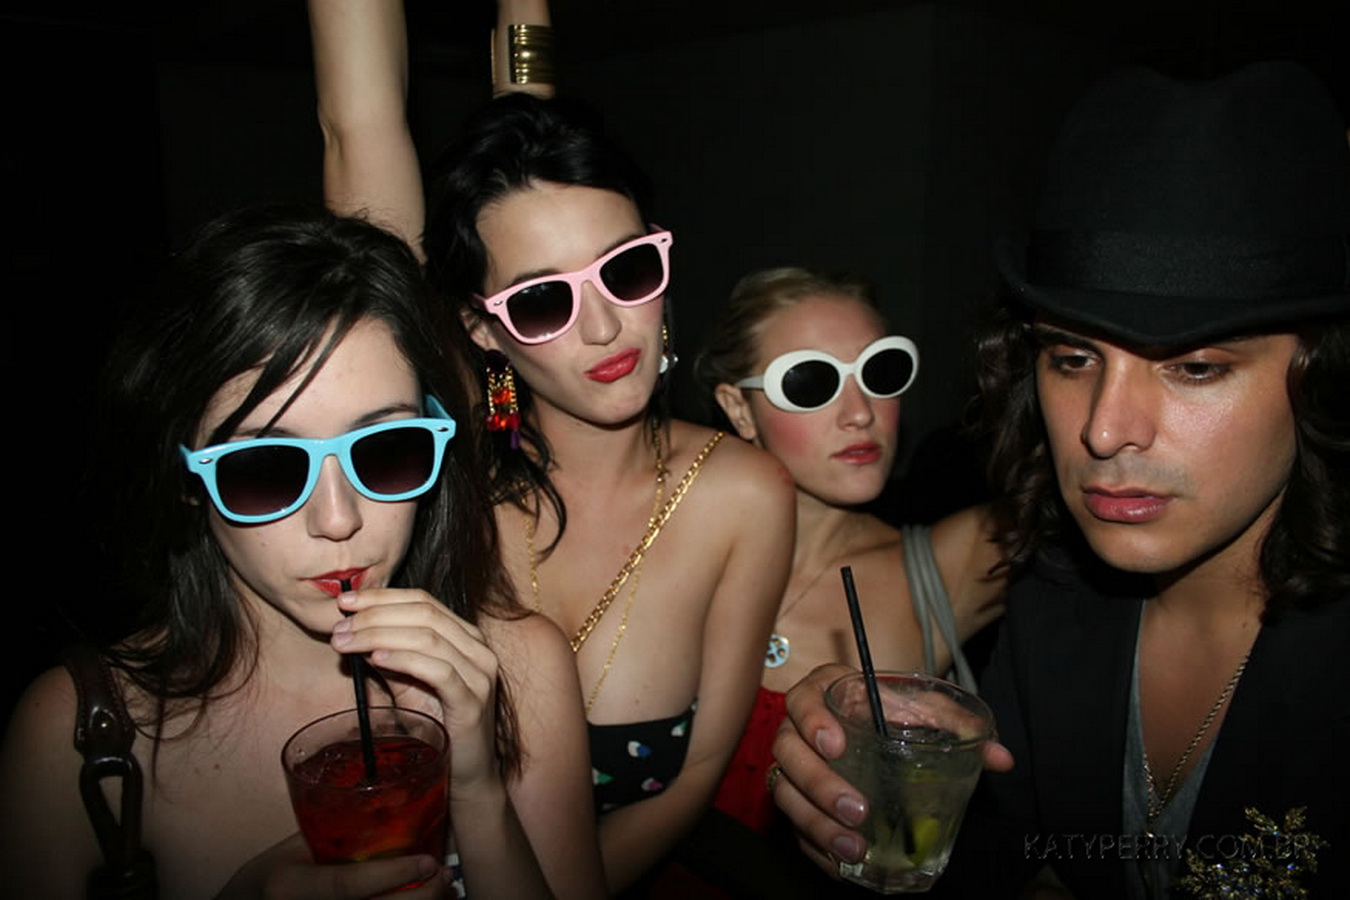 Katy_Perry_bobsslip_drunk_cleavage_downblouse_upskirt_nipslip_at_her_birthday_2007_party_99x_HQ_46.jpg